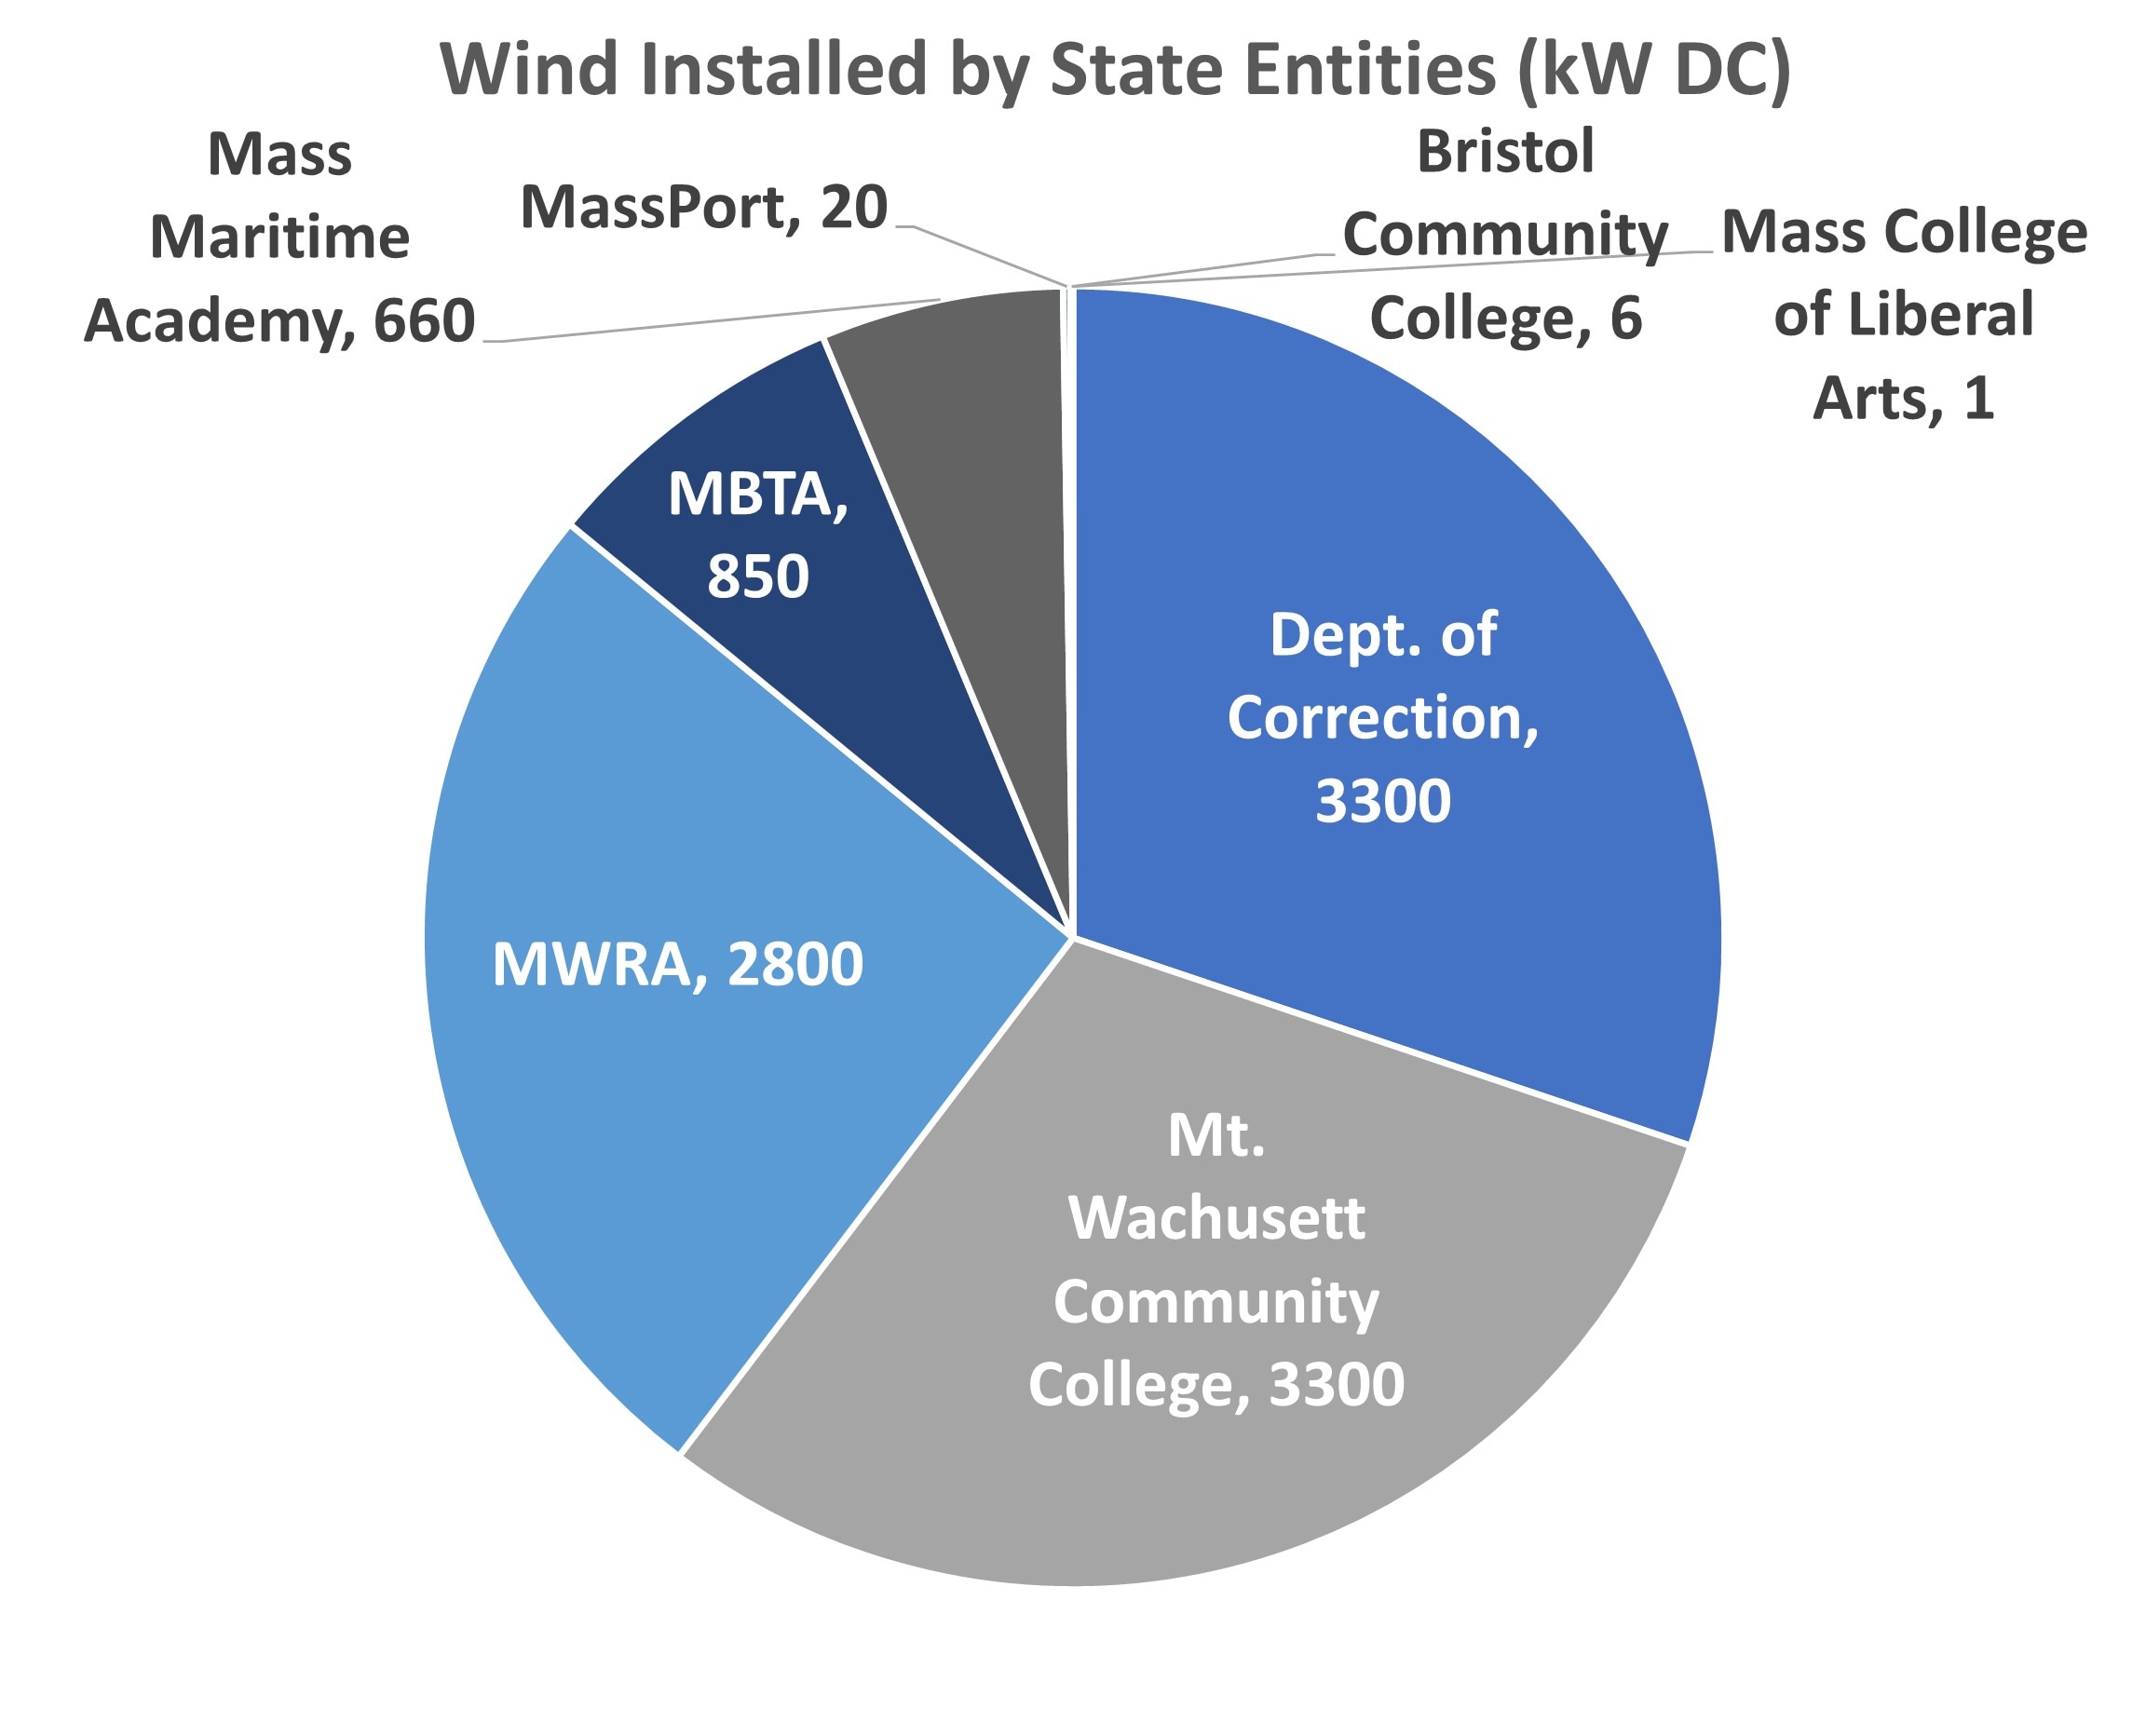 Pie chart showing eight state entities have installed wind turbines across eleven sites.